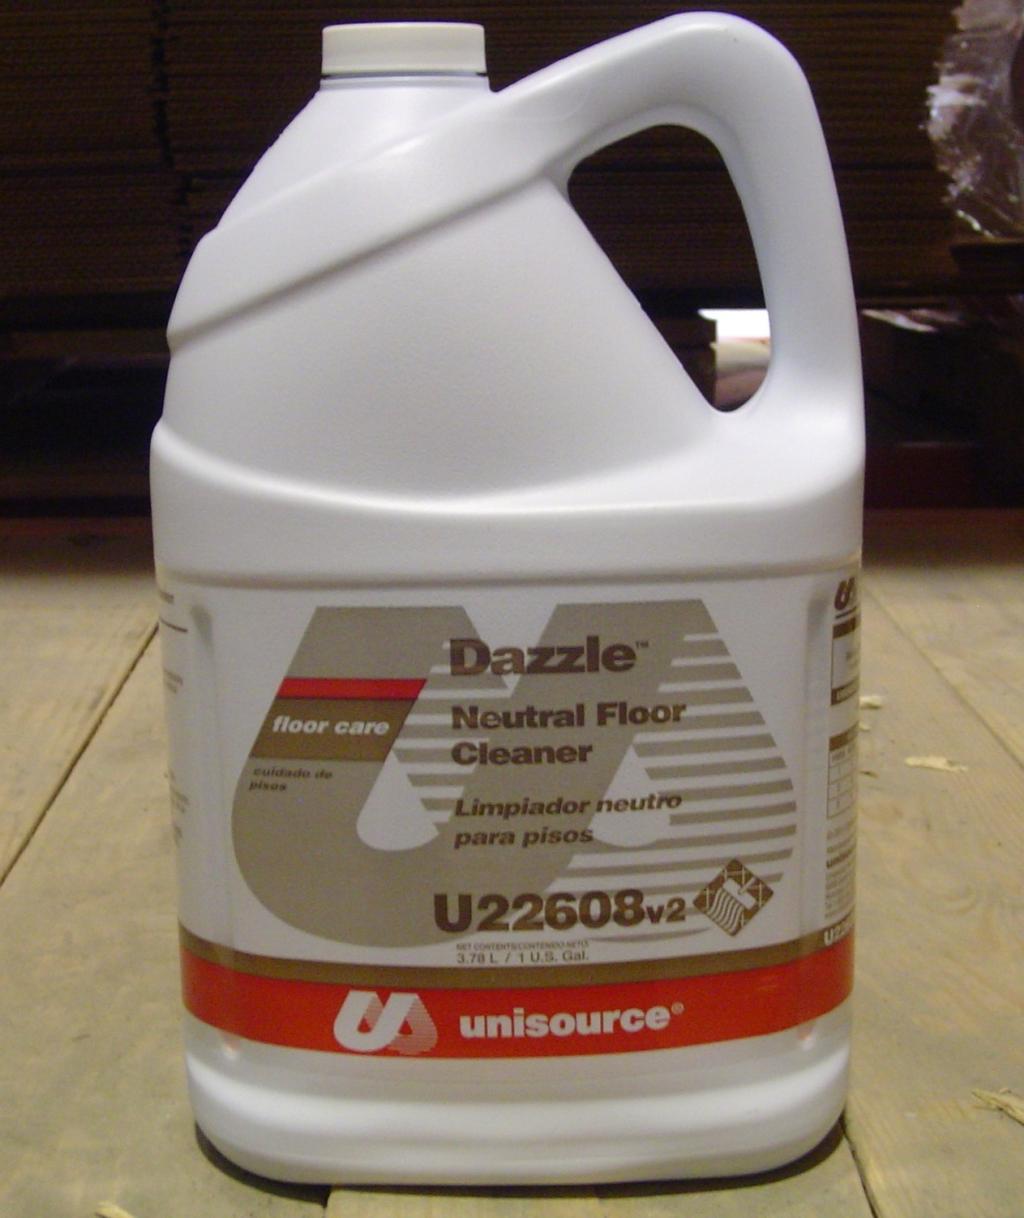 CS0602 = Part Number Neutral Floor Cleaner = Common Name Dazzle Neutral Floor Cleaner = MSDS Name Used for: Neutral floor cleaner is a ph balanced floor cleaner used for mopping floors.